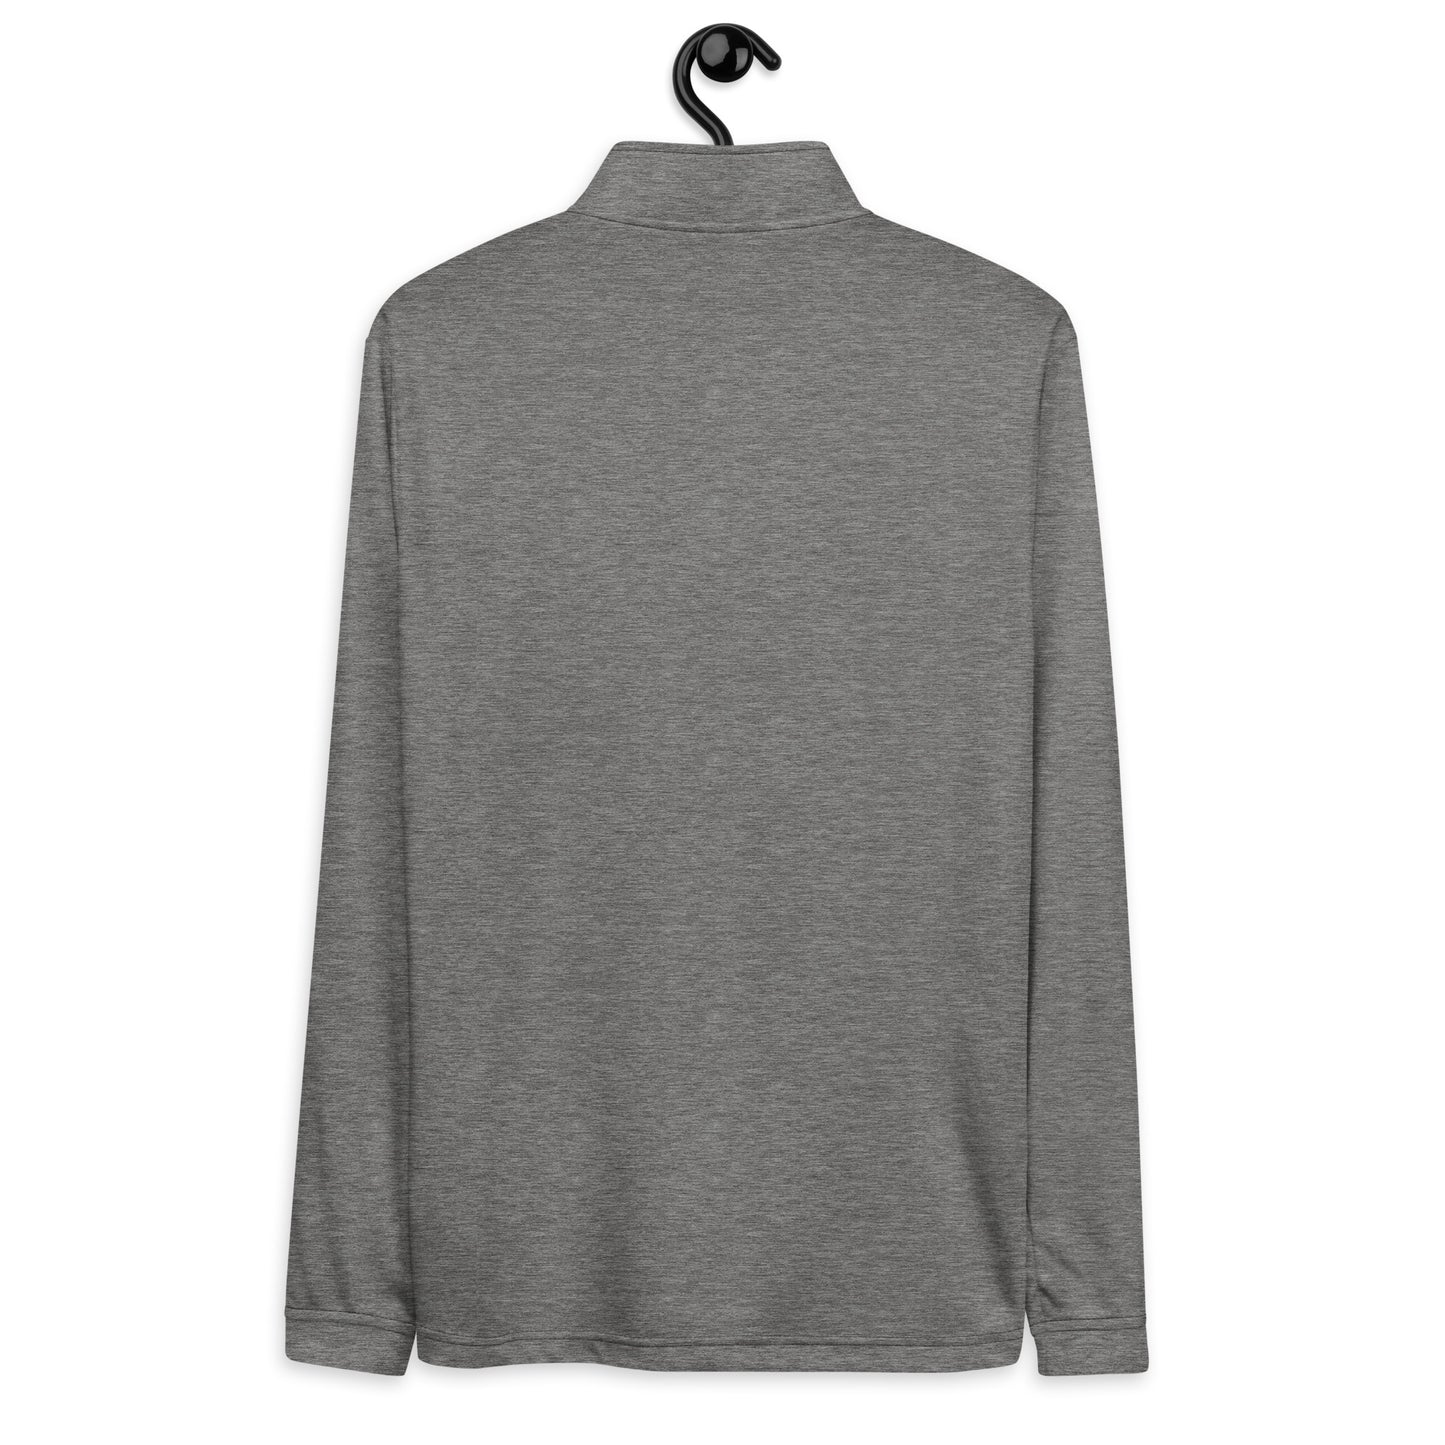 Natural Energy Adidas 1/4 Zip Pullover